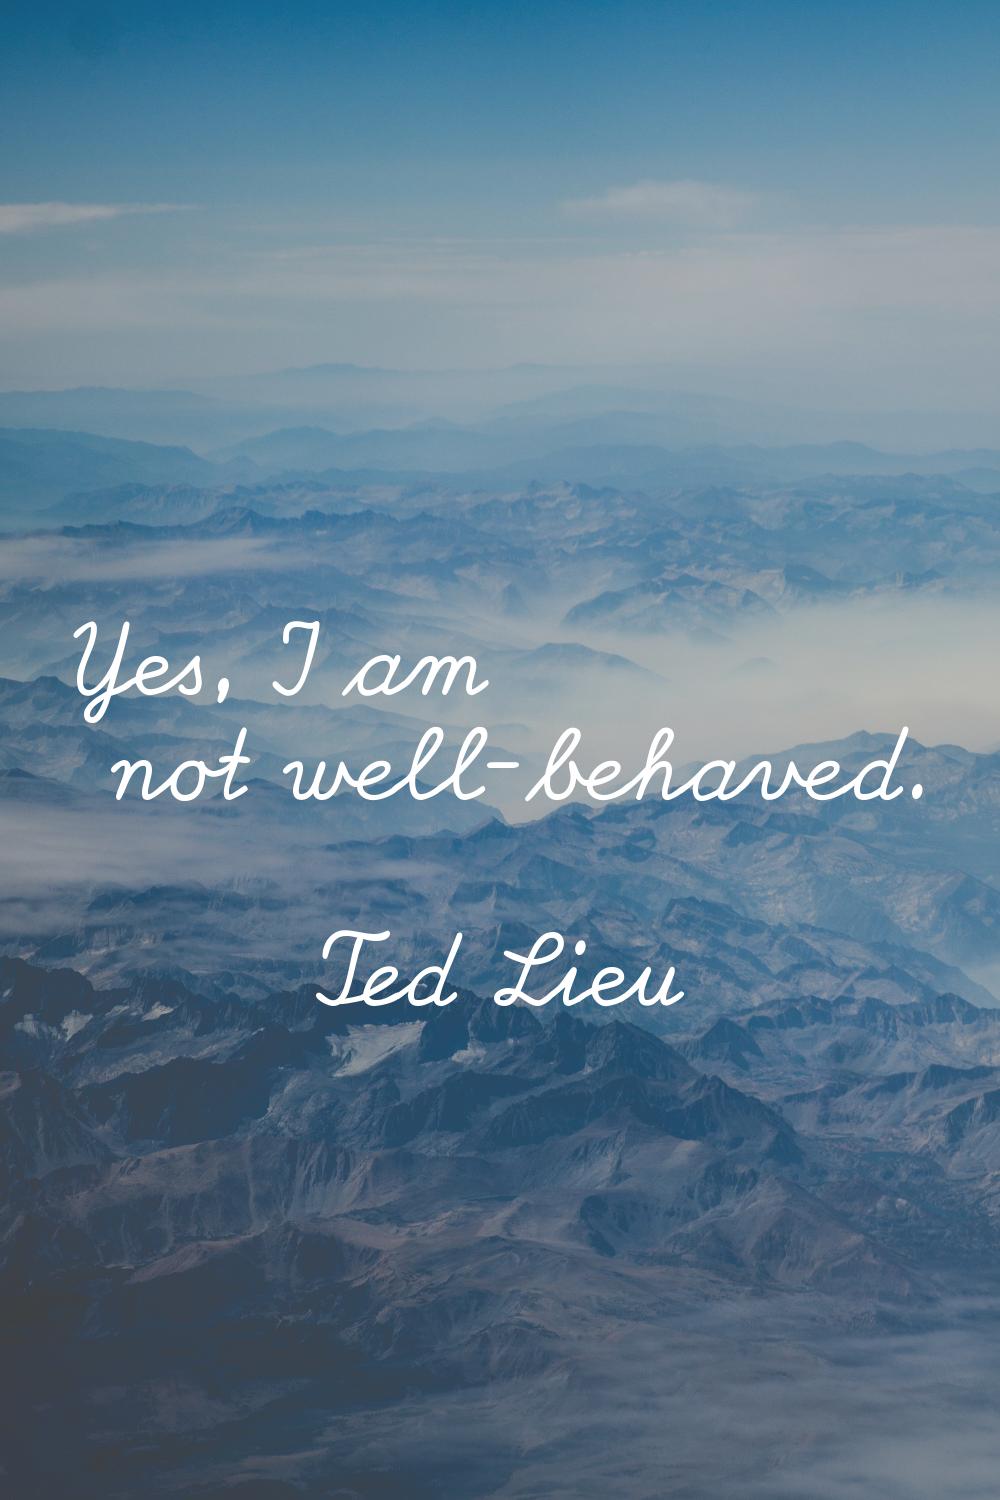 Yes, I am not well-behaved.